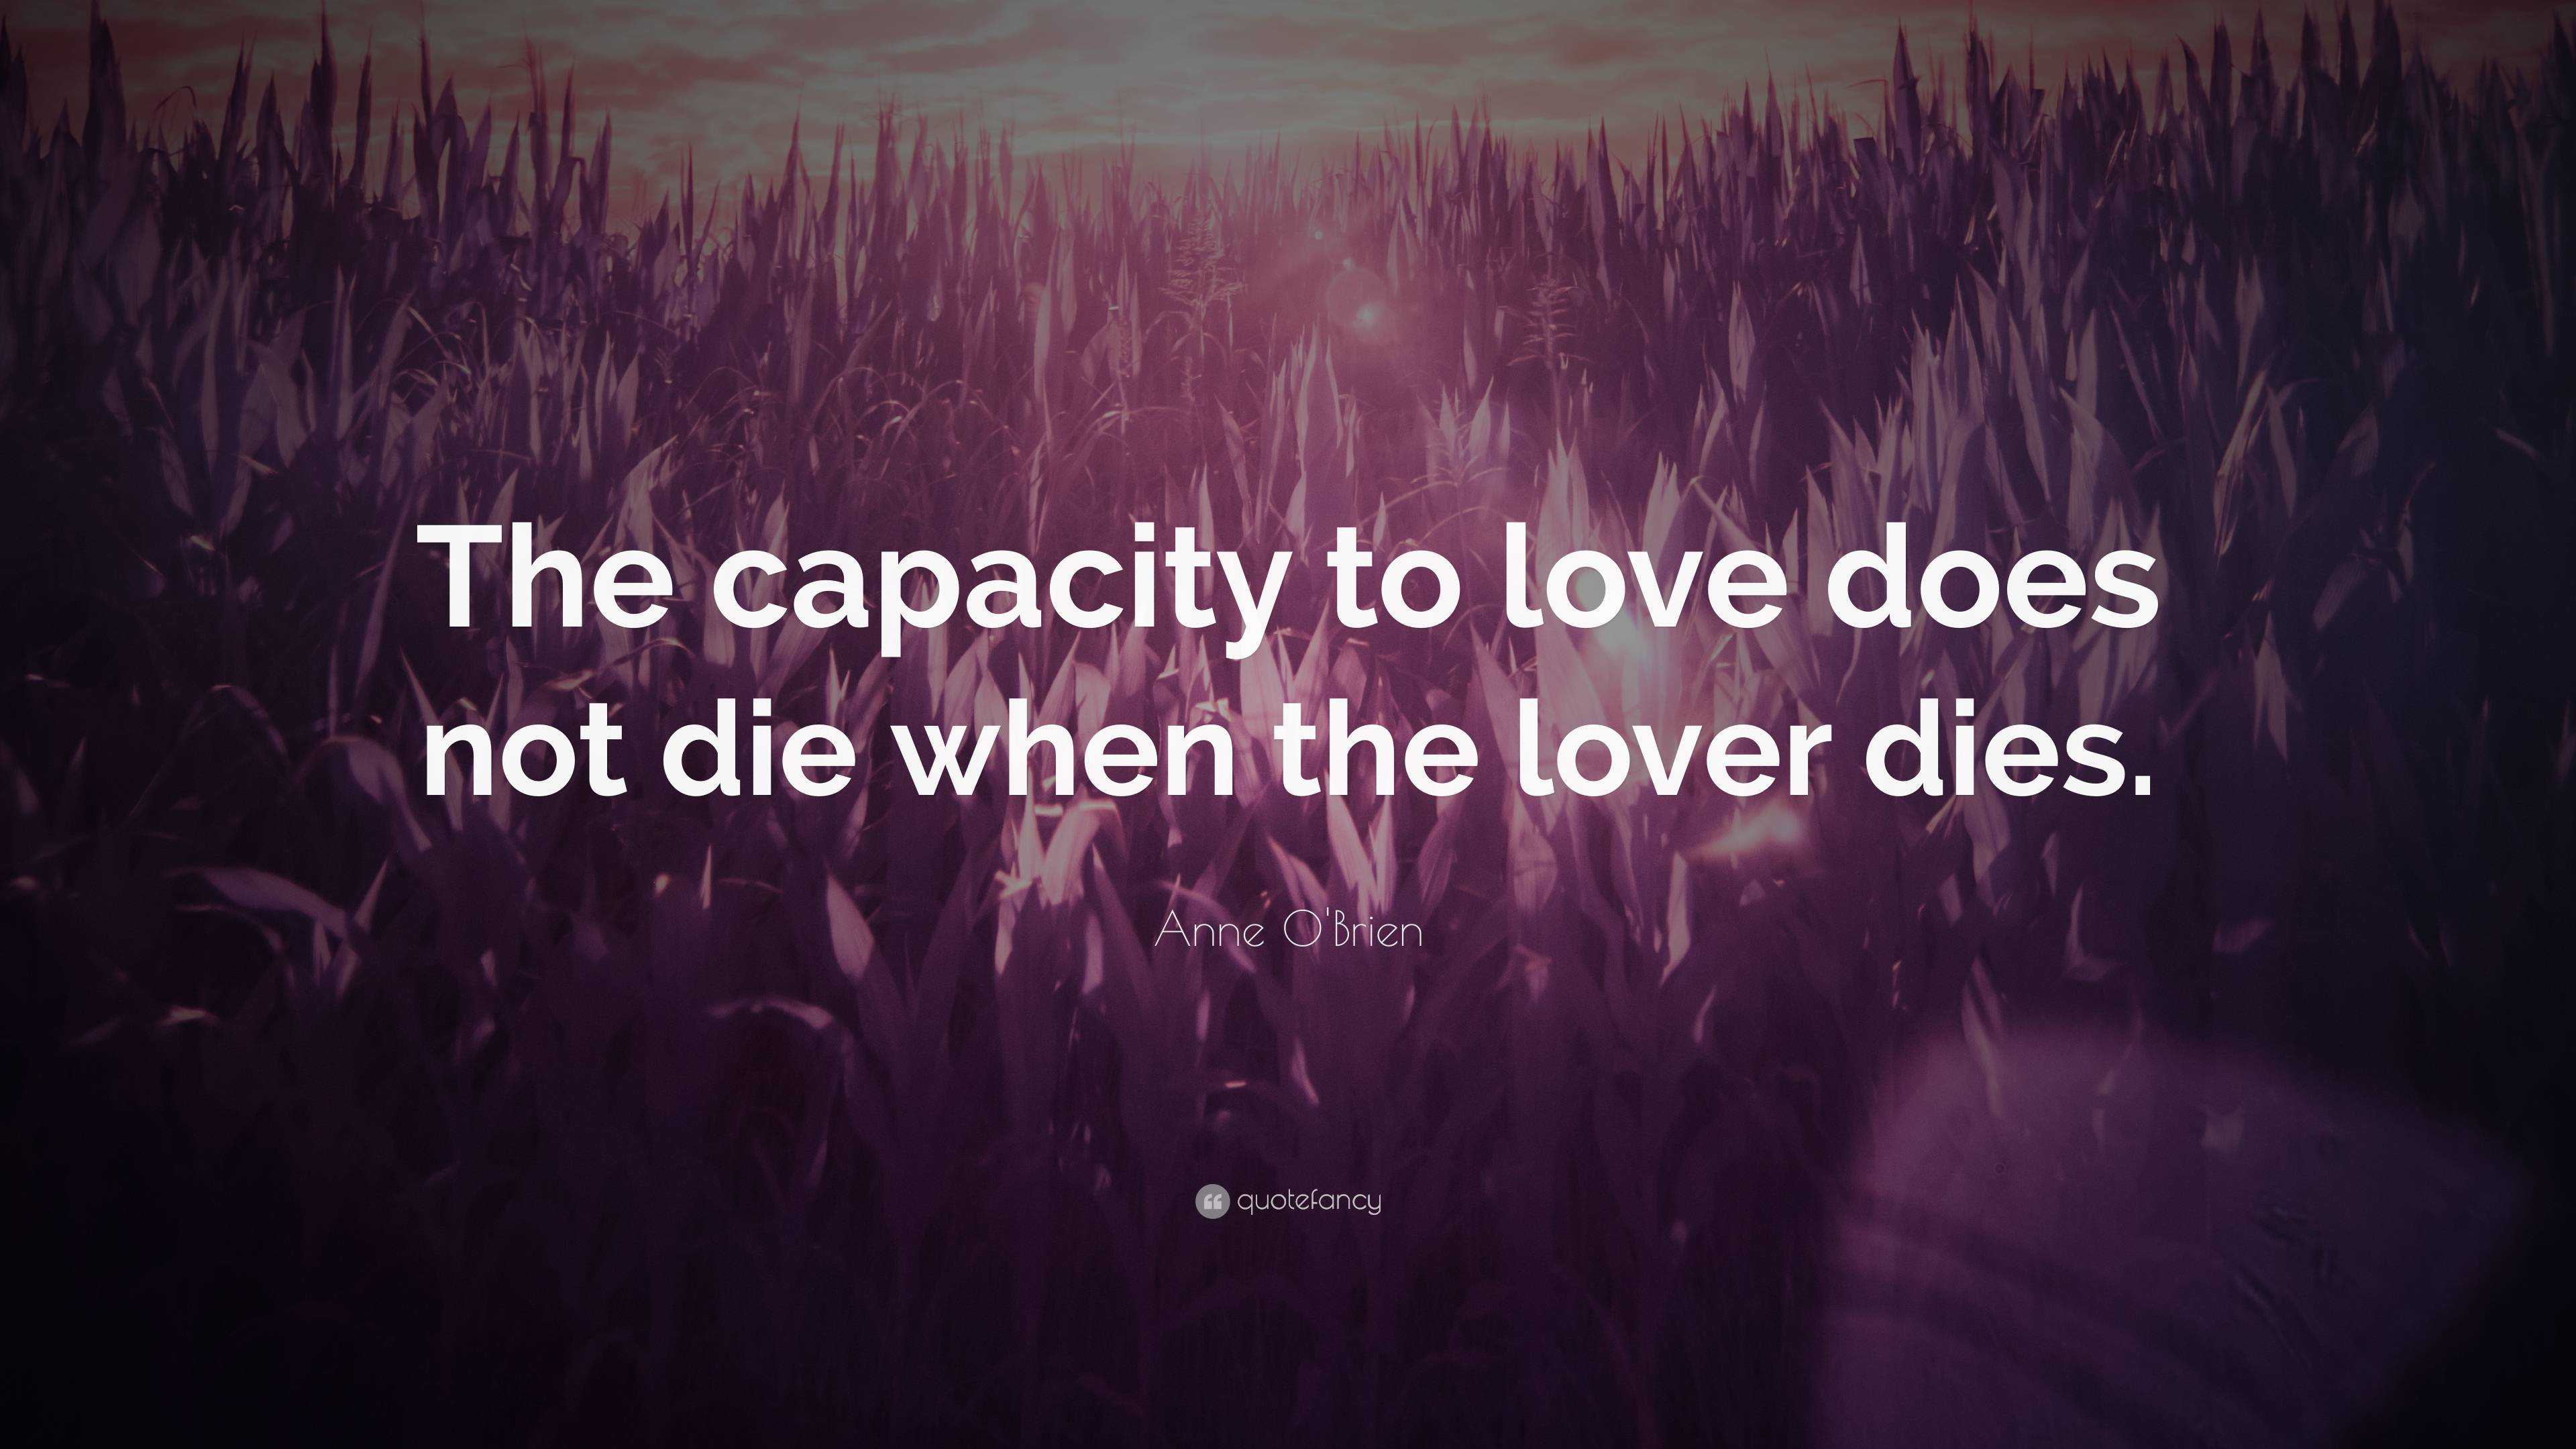 Anne O'Brien Quote: “The capacity to love does not die when the lover ...